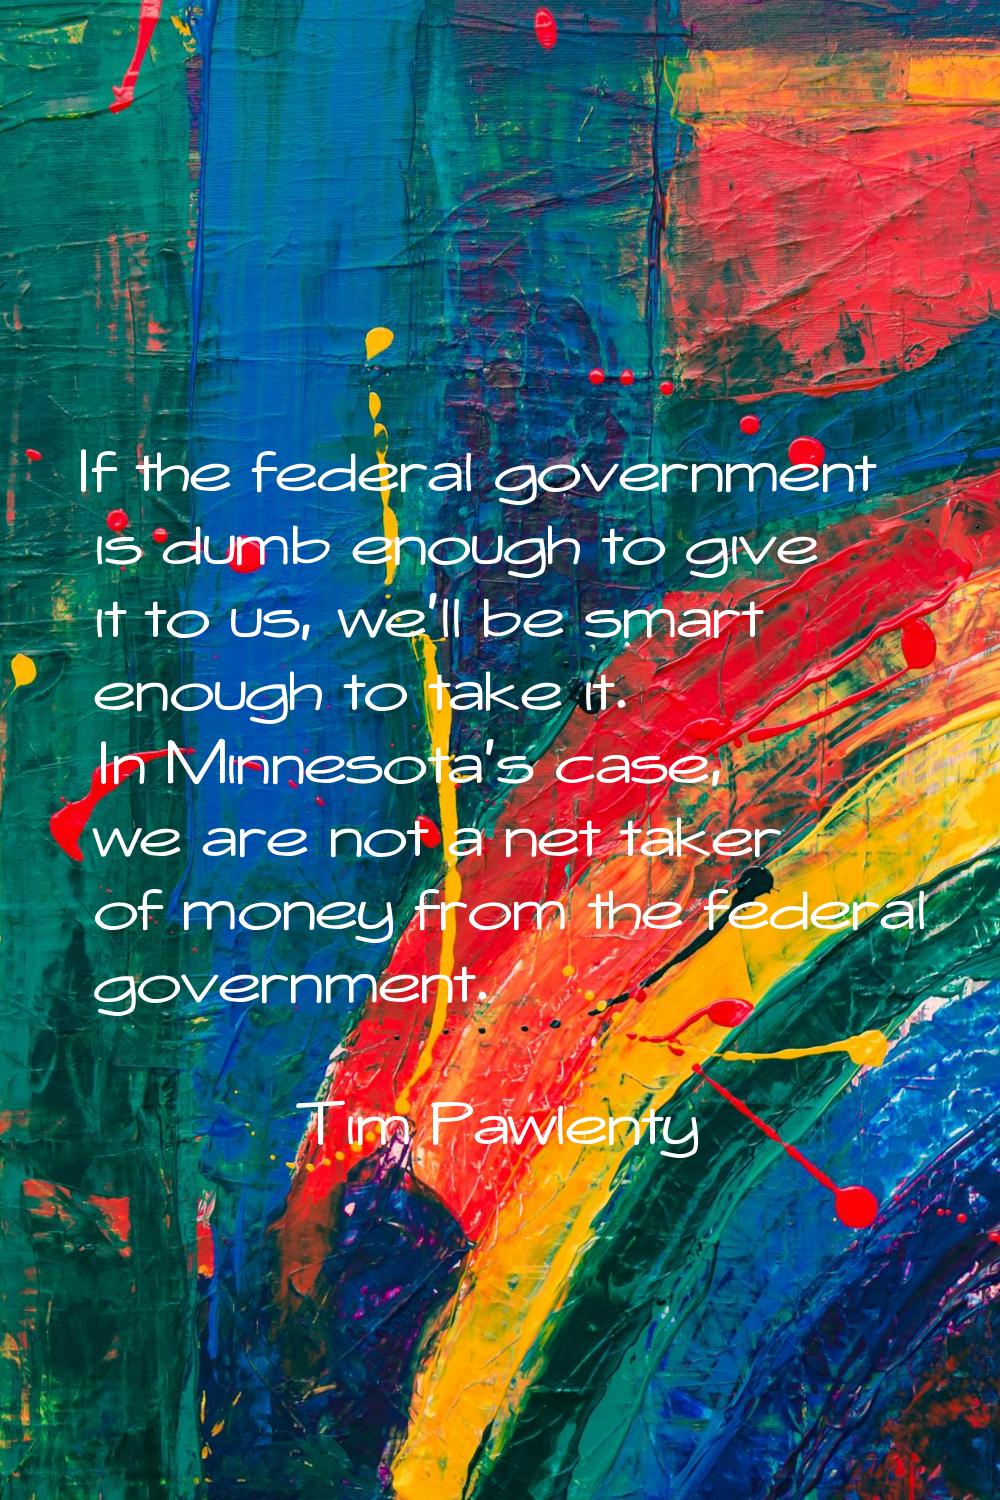 If the federal government is dumb enough to give it to us, we'll be smart enough to take it. In Min